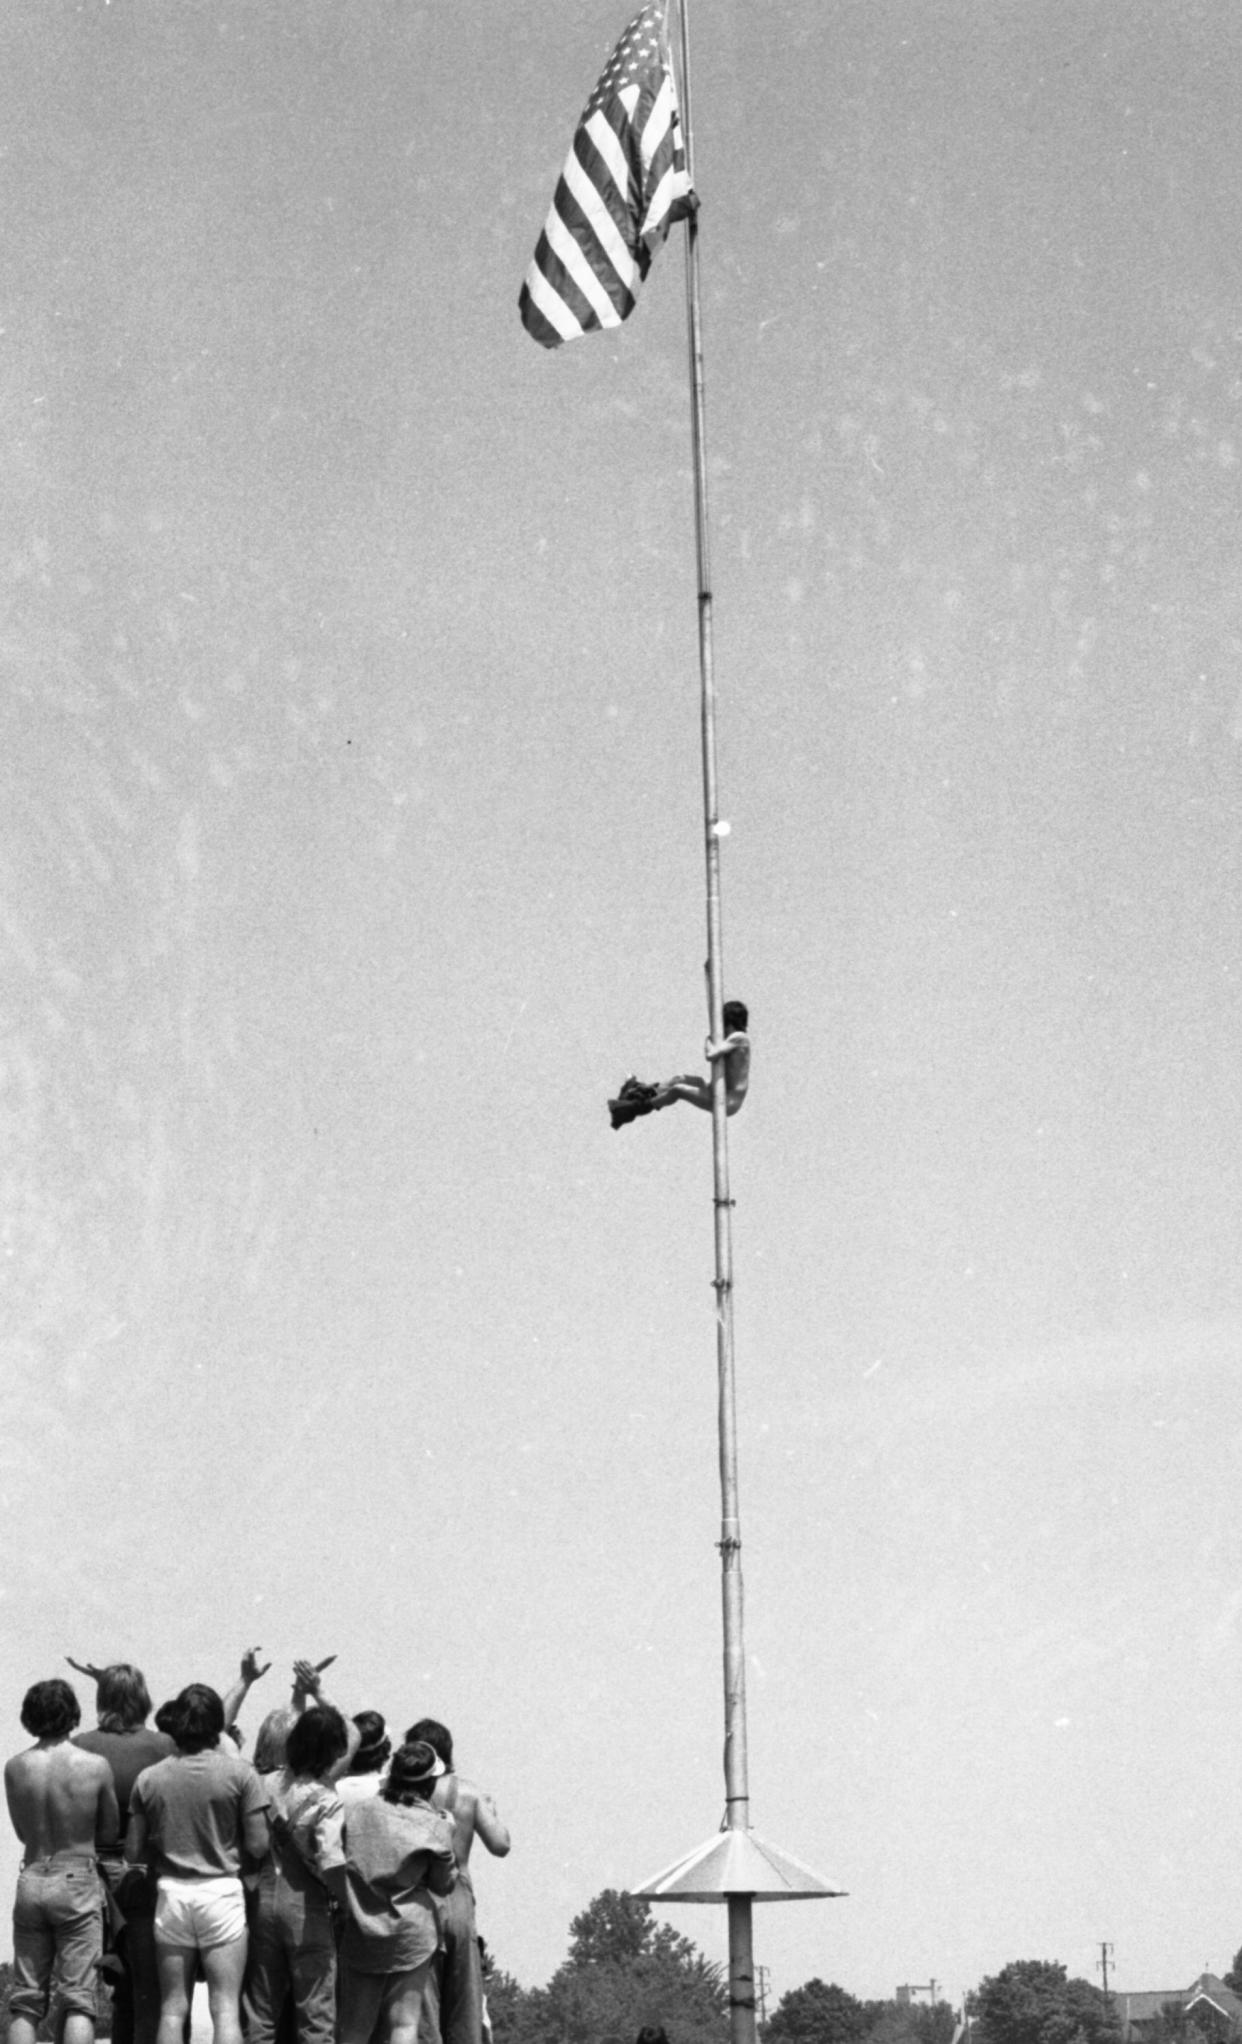 Kentucky Derby: The infield ogles a striptease atop flagpole at Churchill Downs. 
May 4, 1974

Photo by Keith Williams, THE COURIER-JOURNAL